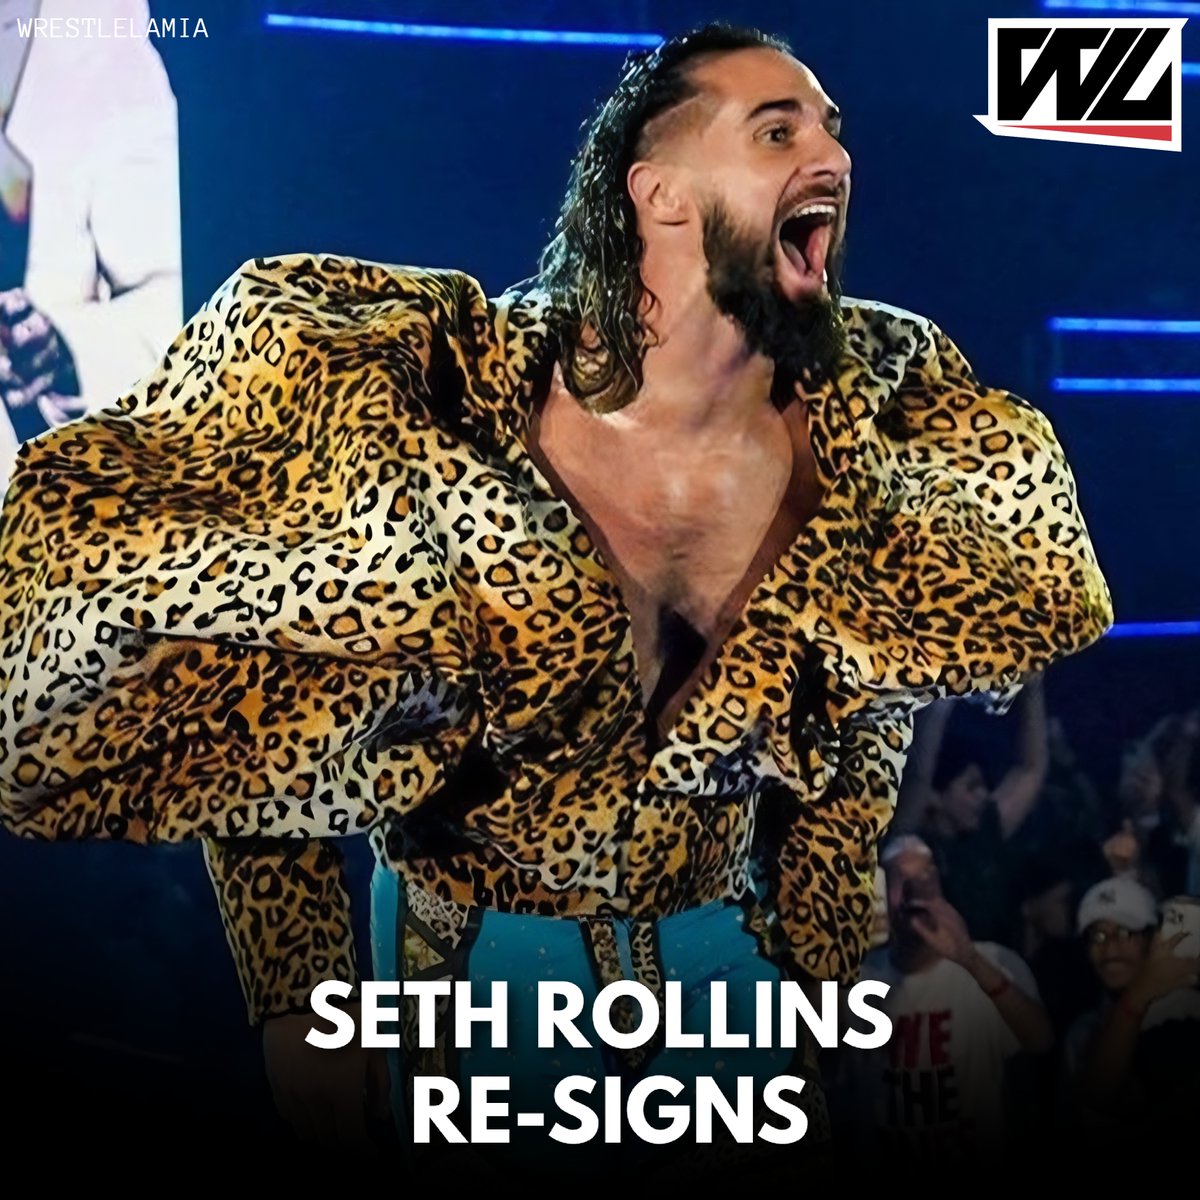 Seth Rollins has Re-Signed with WWE for a multi-year deal.